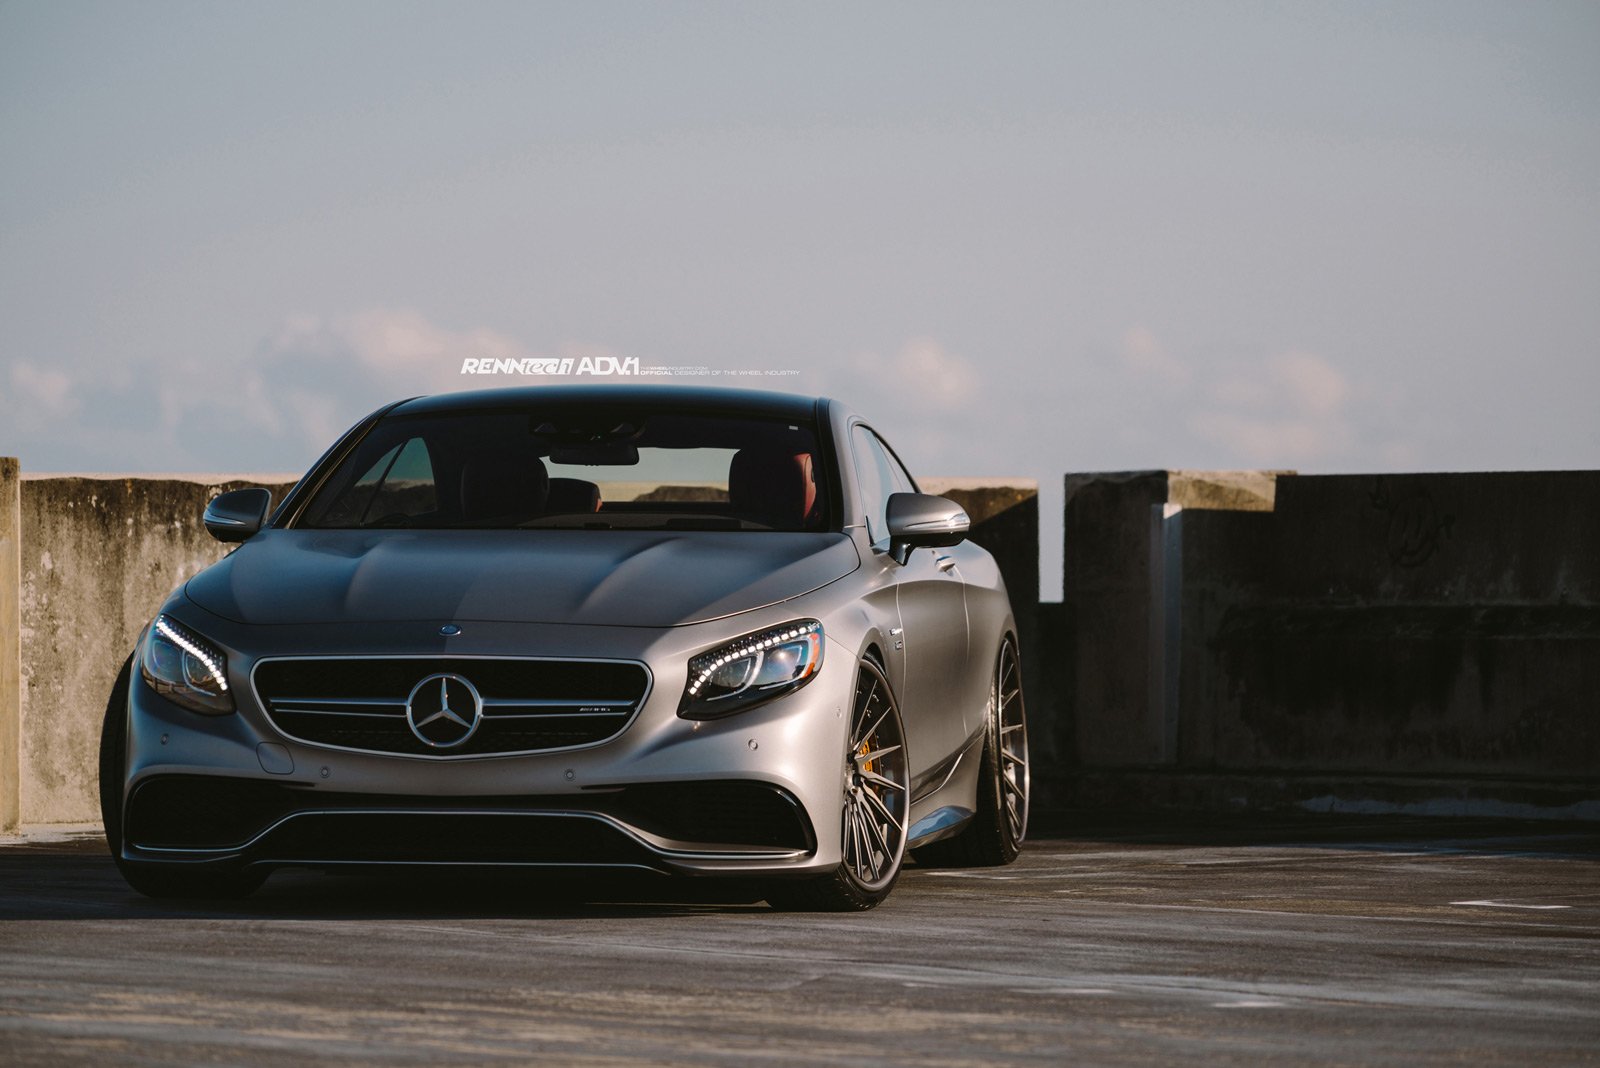 2015, Adv1, Wheels, Tuning, Cars, Mercedes, S63, Amg, Coupe Wallpaper